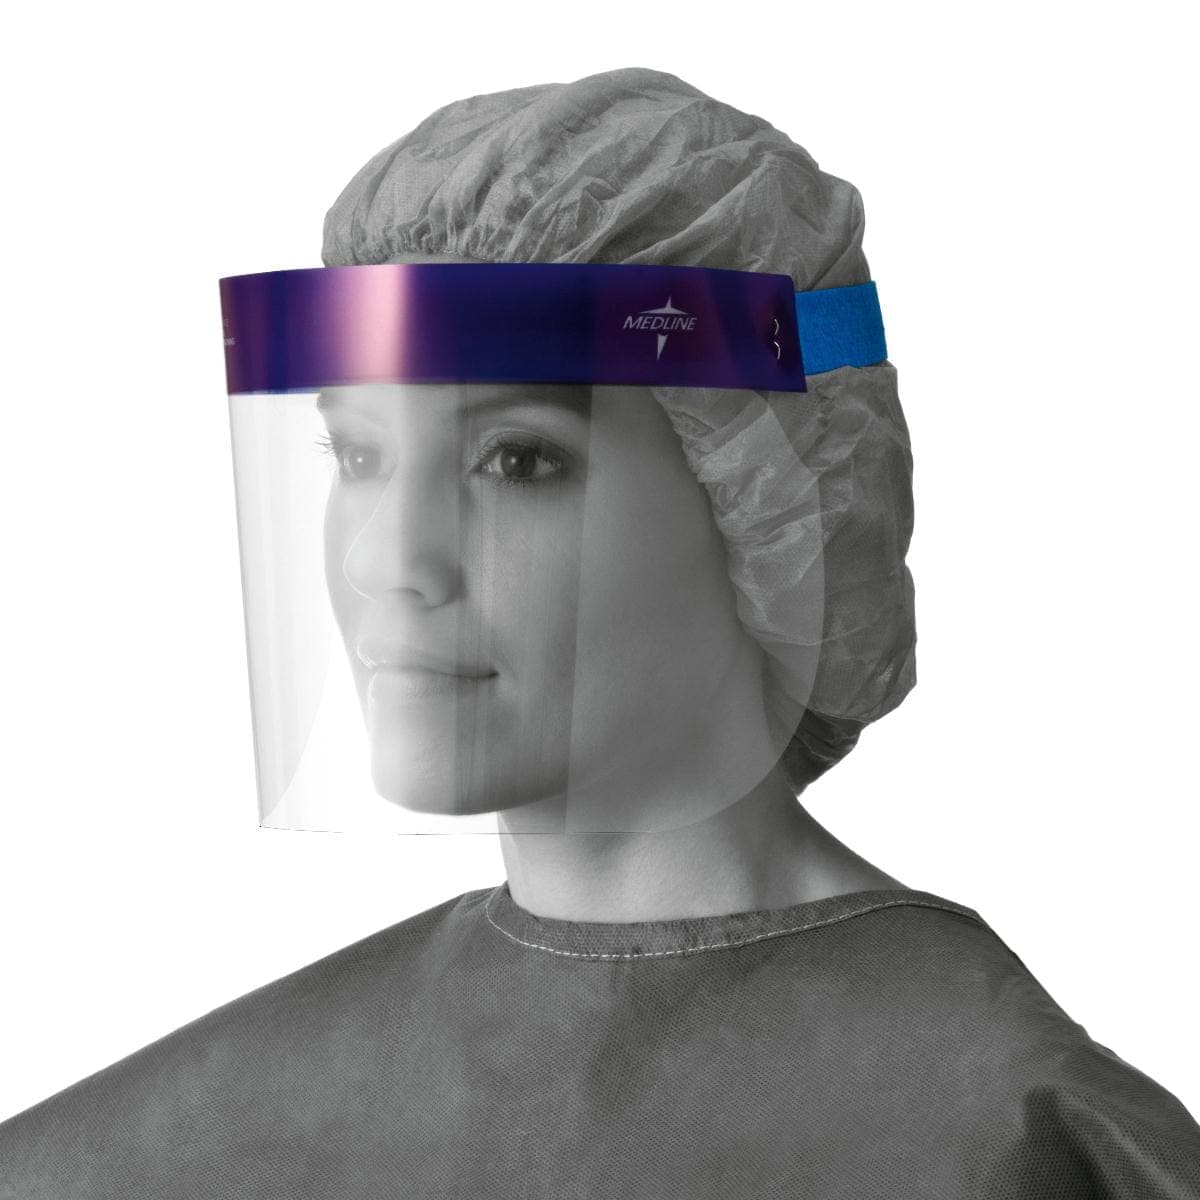 Medline Single Item Medline 3/4 Length Disposable Face Shields with Foam Top and Elastic Band